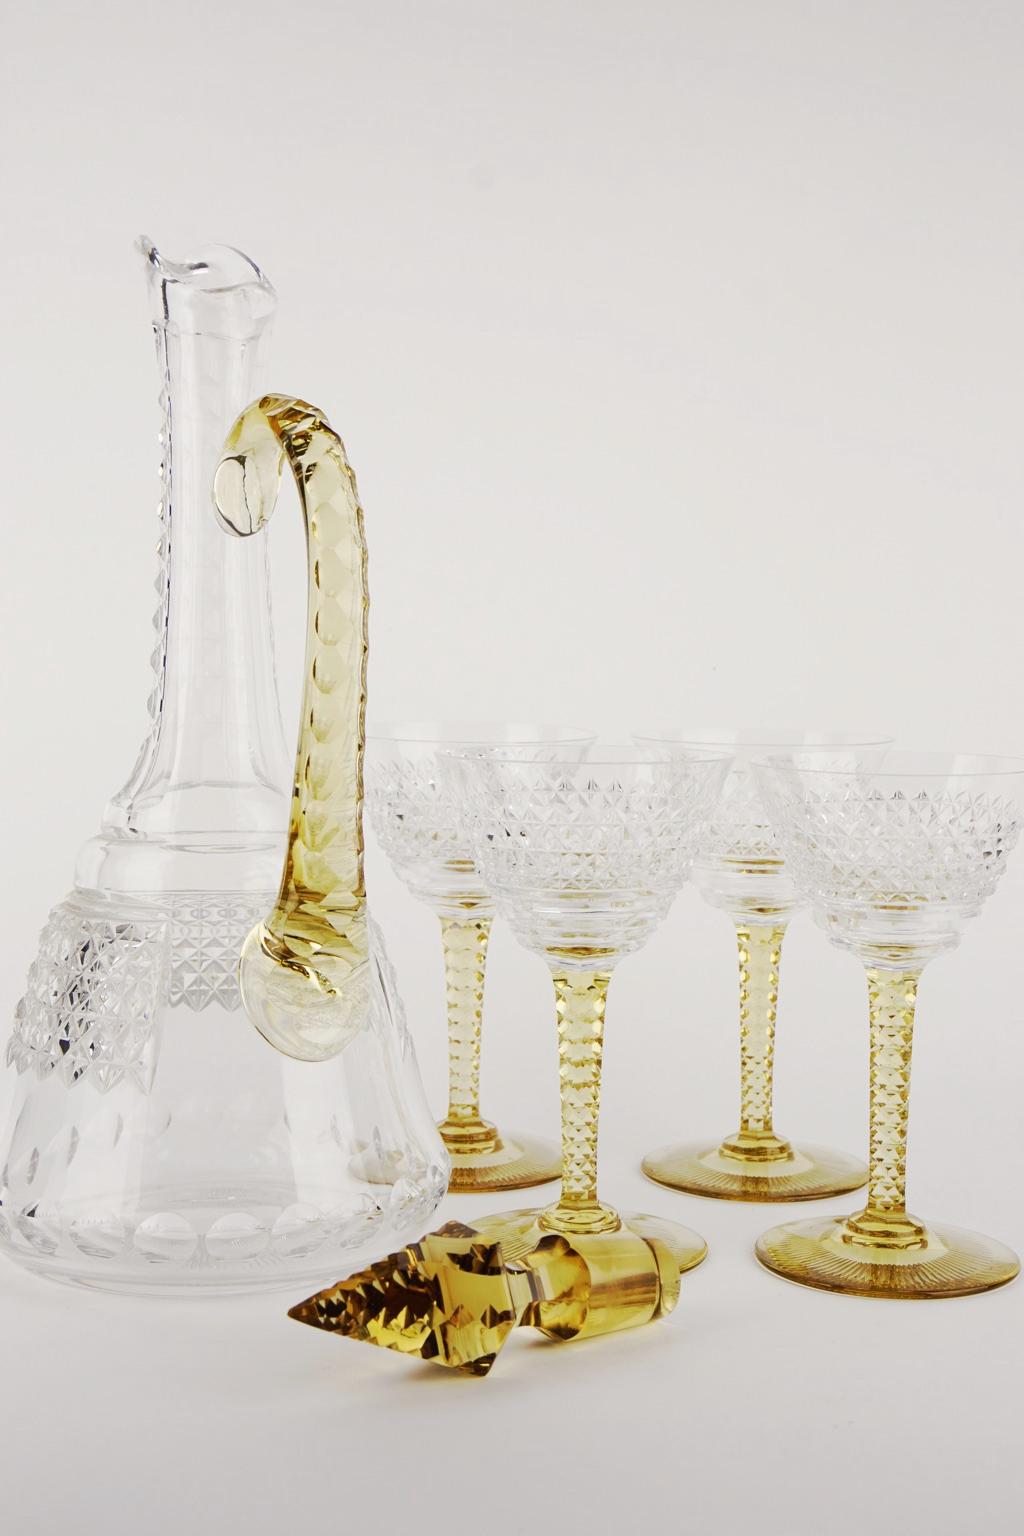 Art Deco Crystal Topaz and White Liquor Service Decanter and Glasses For Sale 2